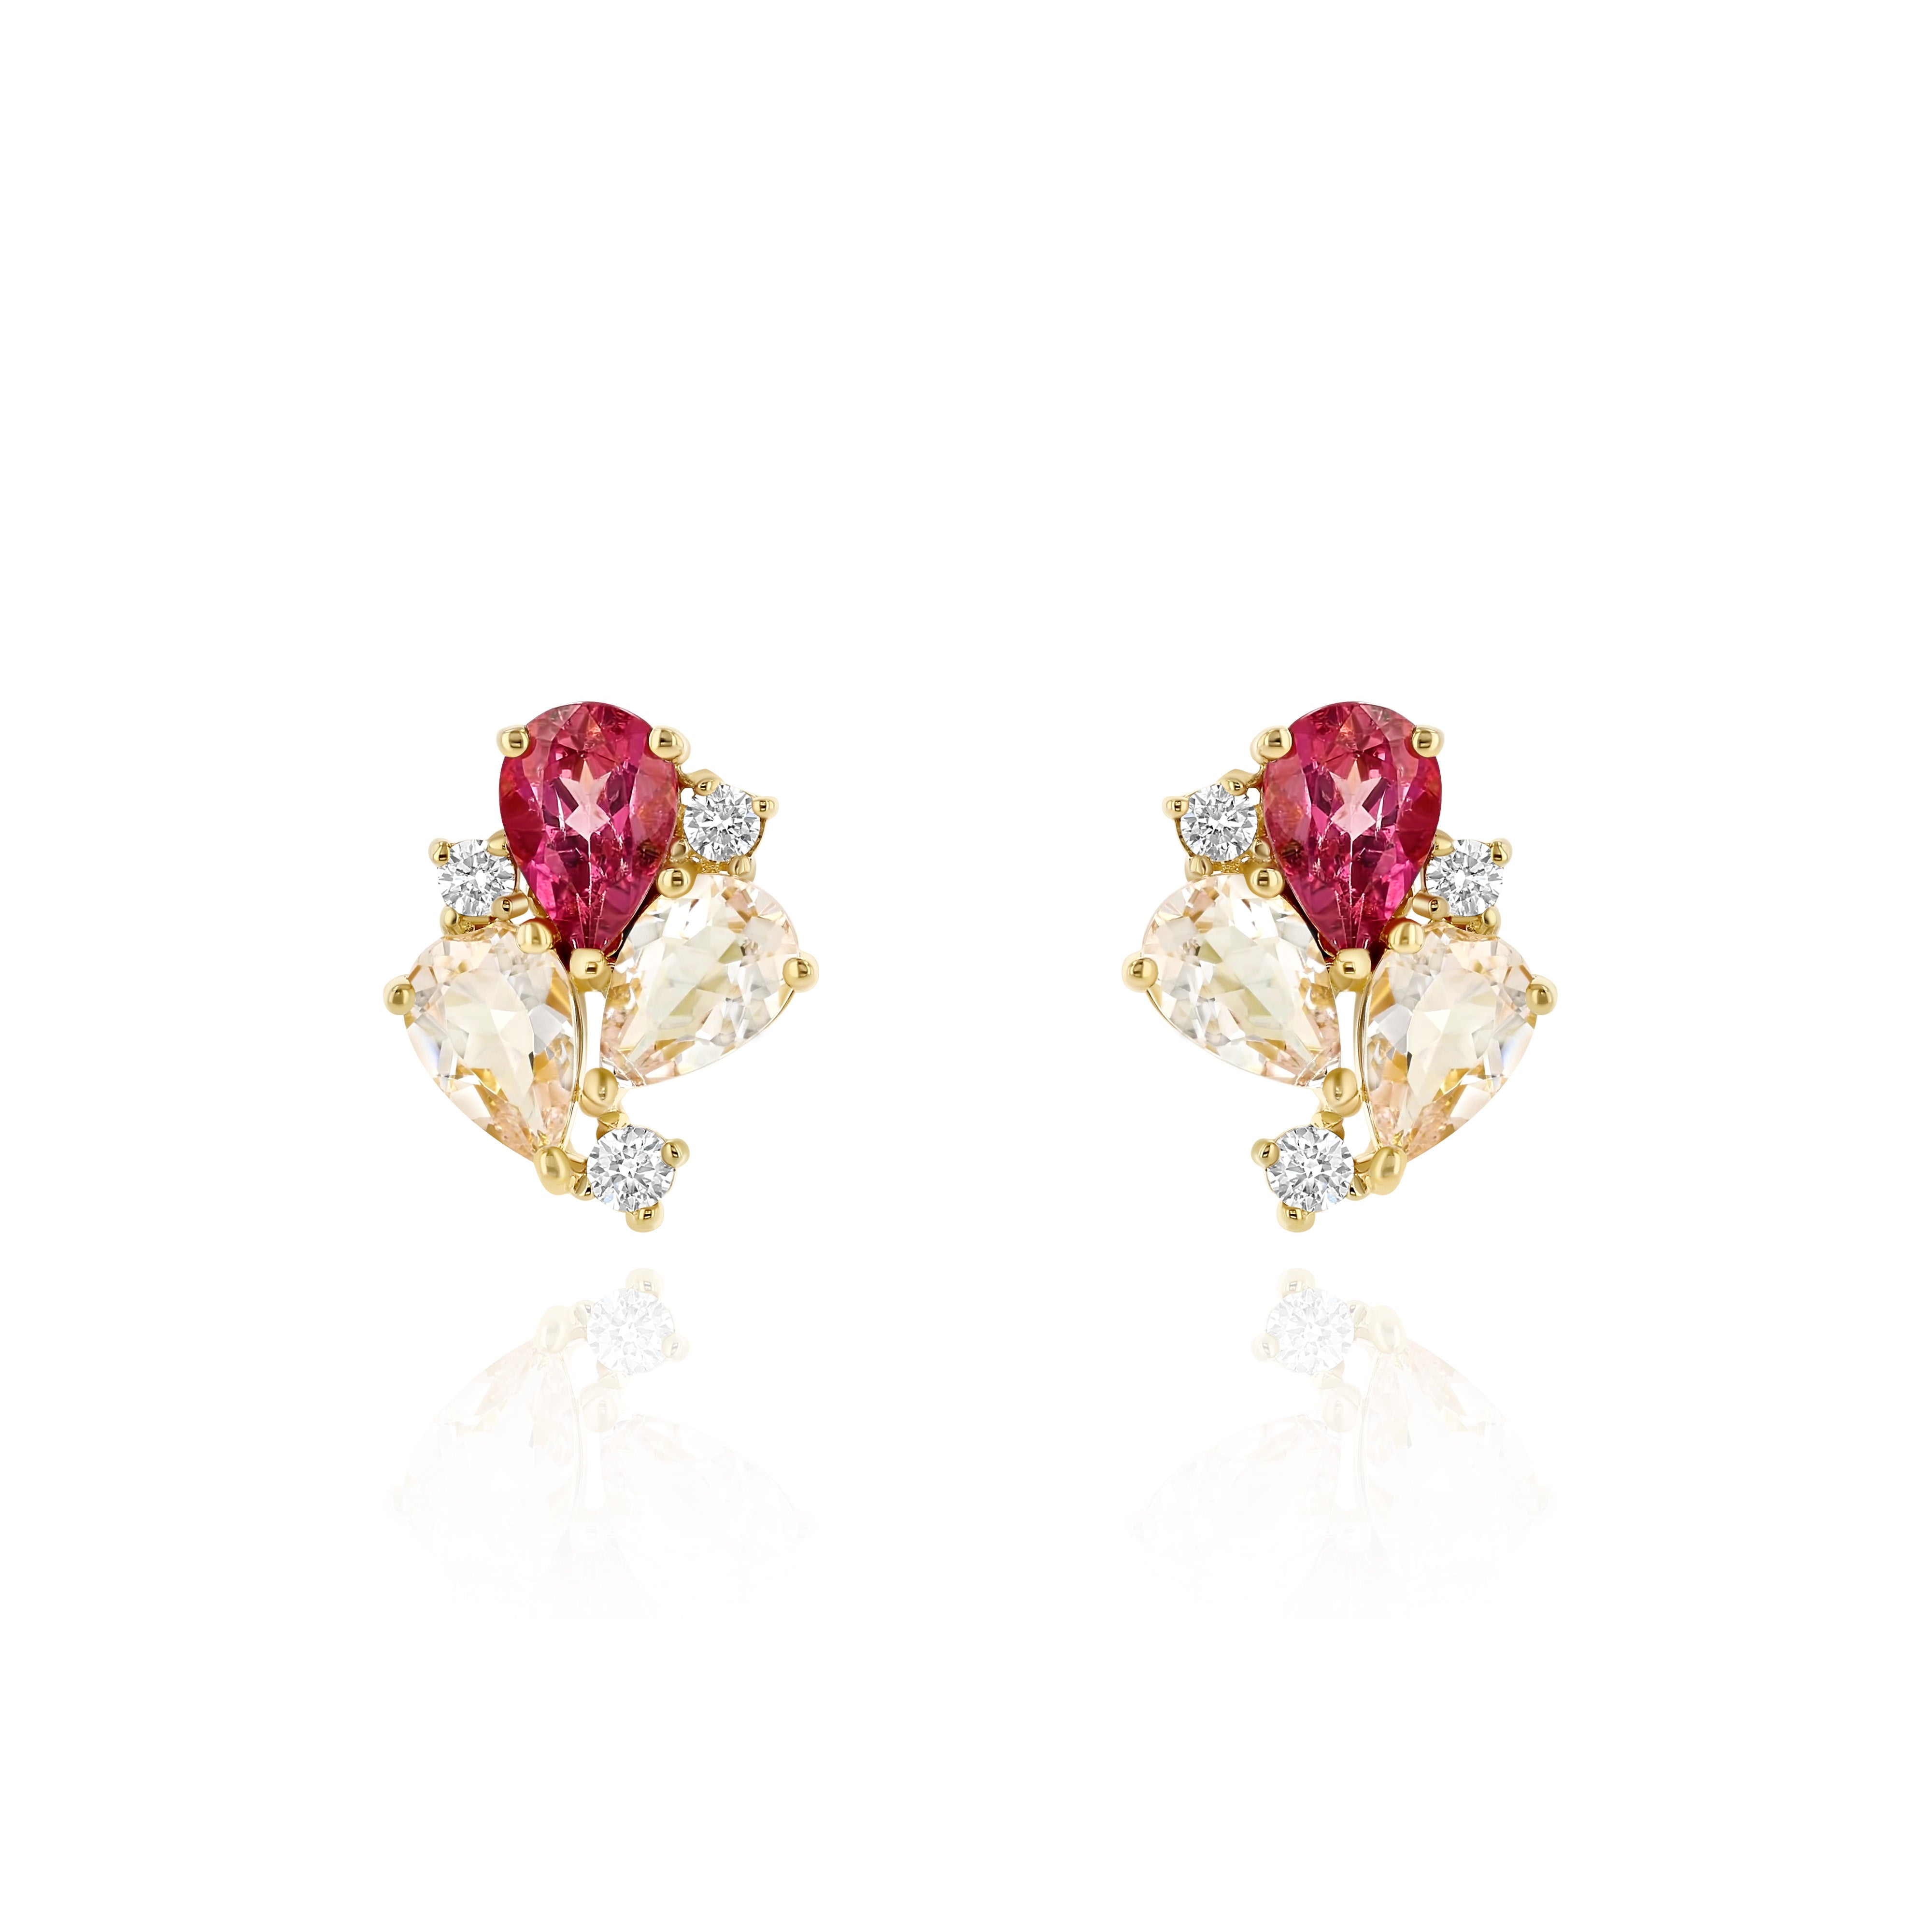 Yellow Gold Earrings with Pink Sapphires, Morganite, and Diamonds, Small